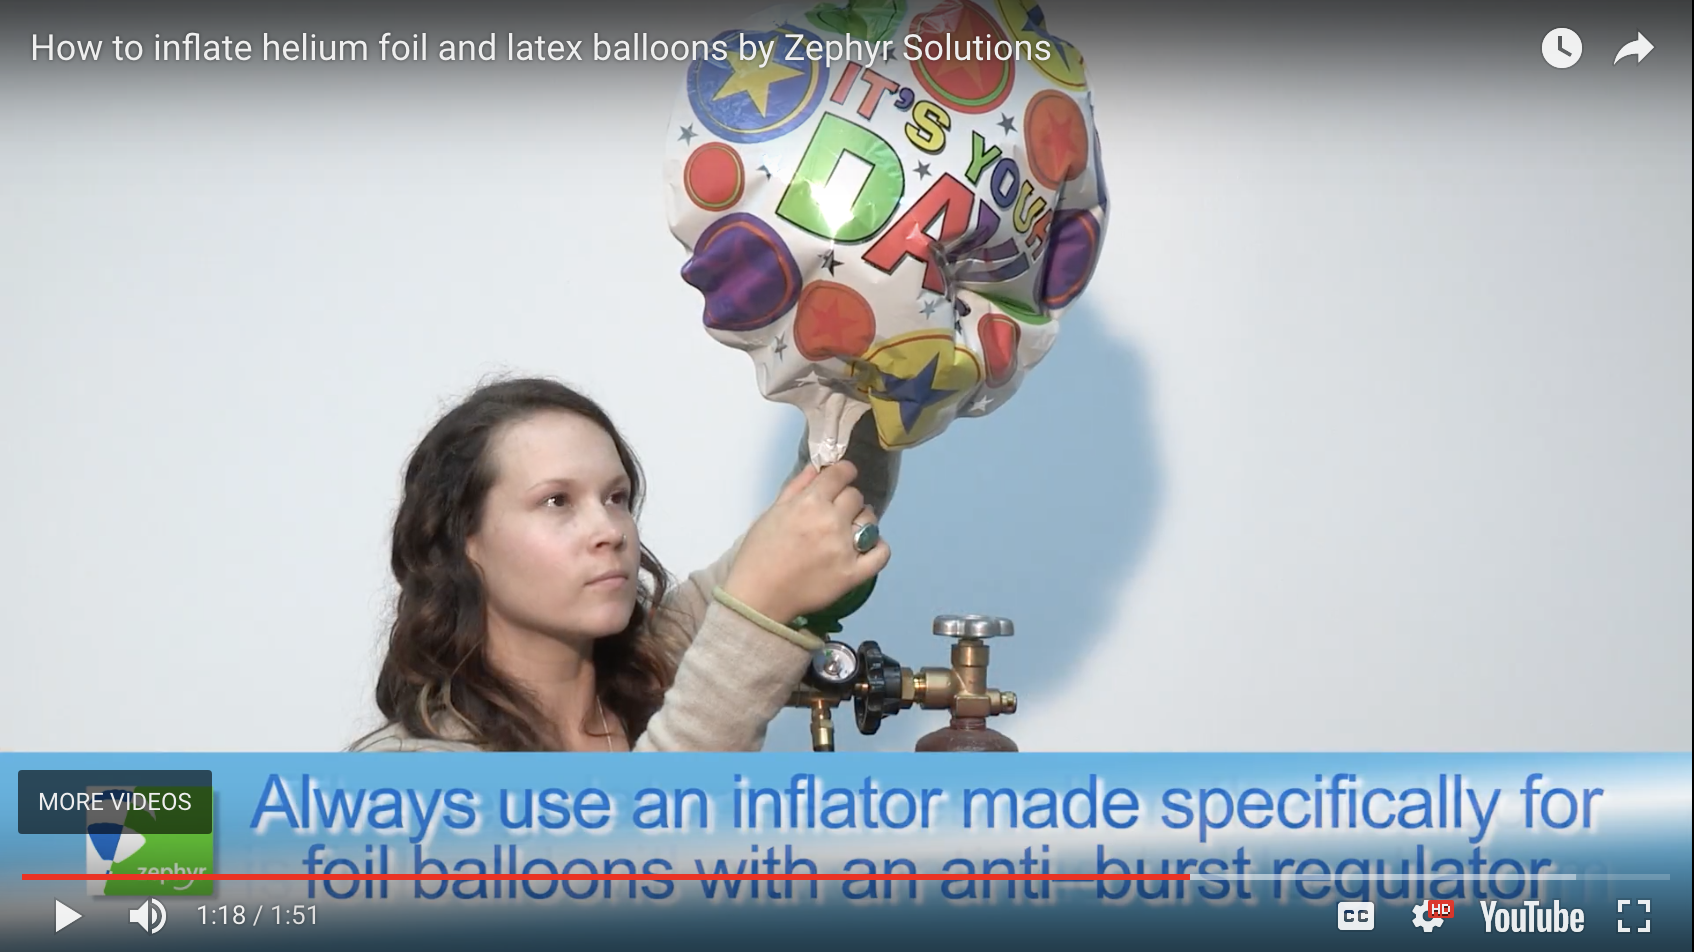 Ask Zephyr: How to inflate helium foil & latex balloons